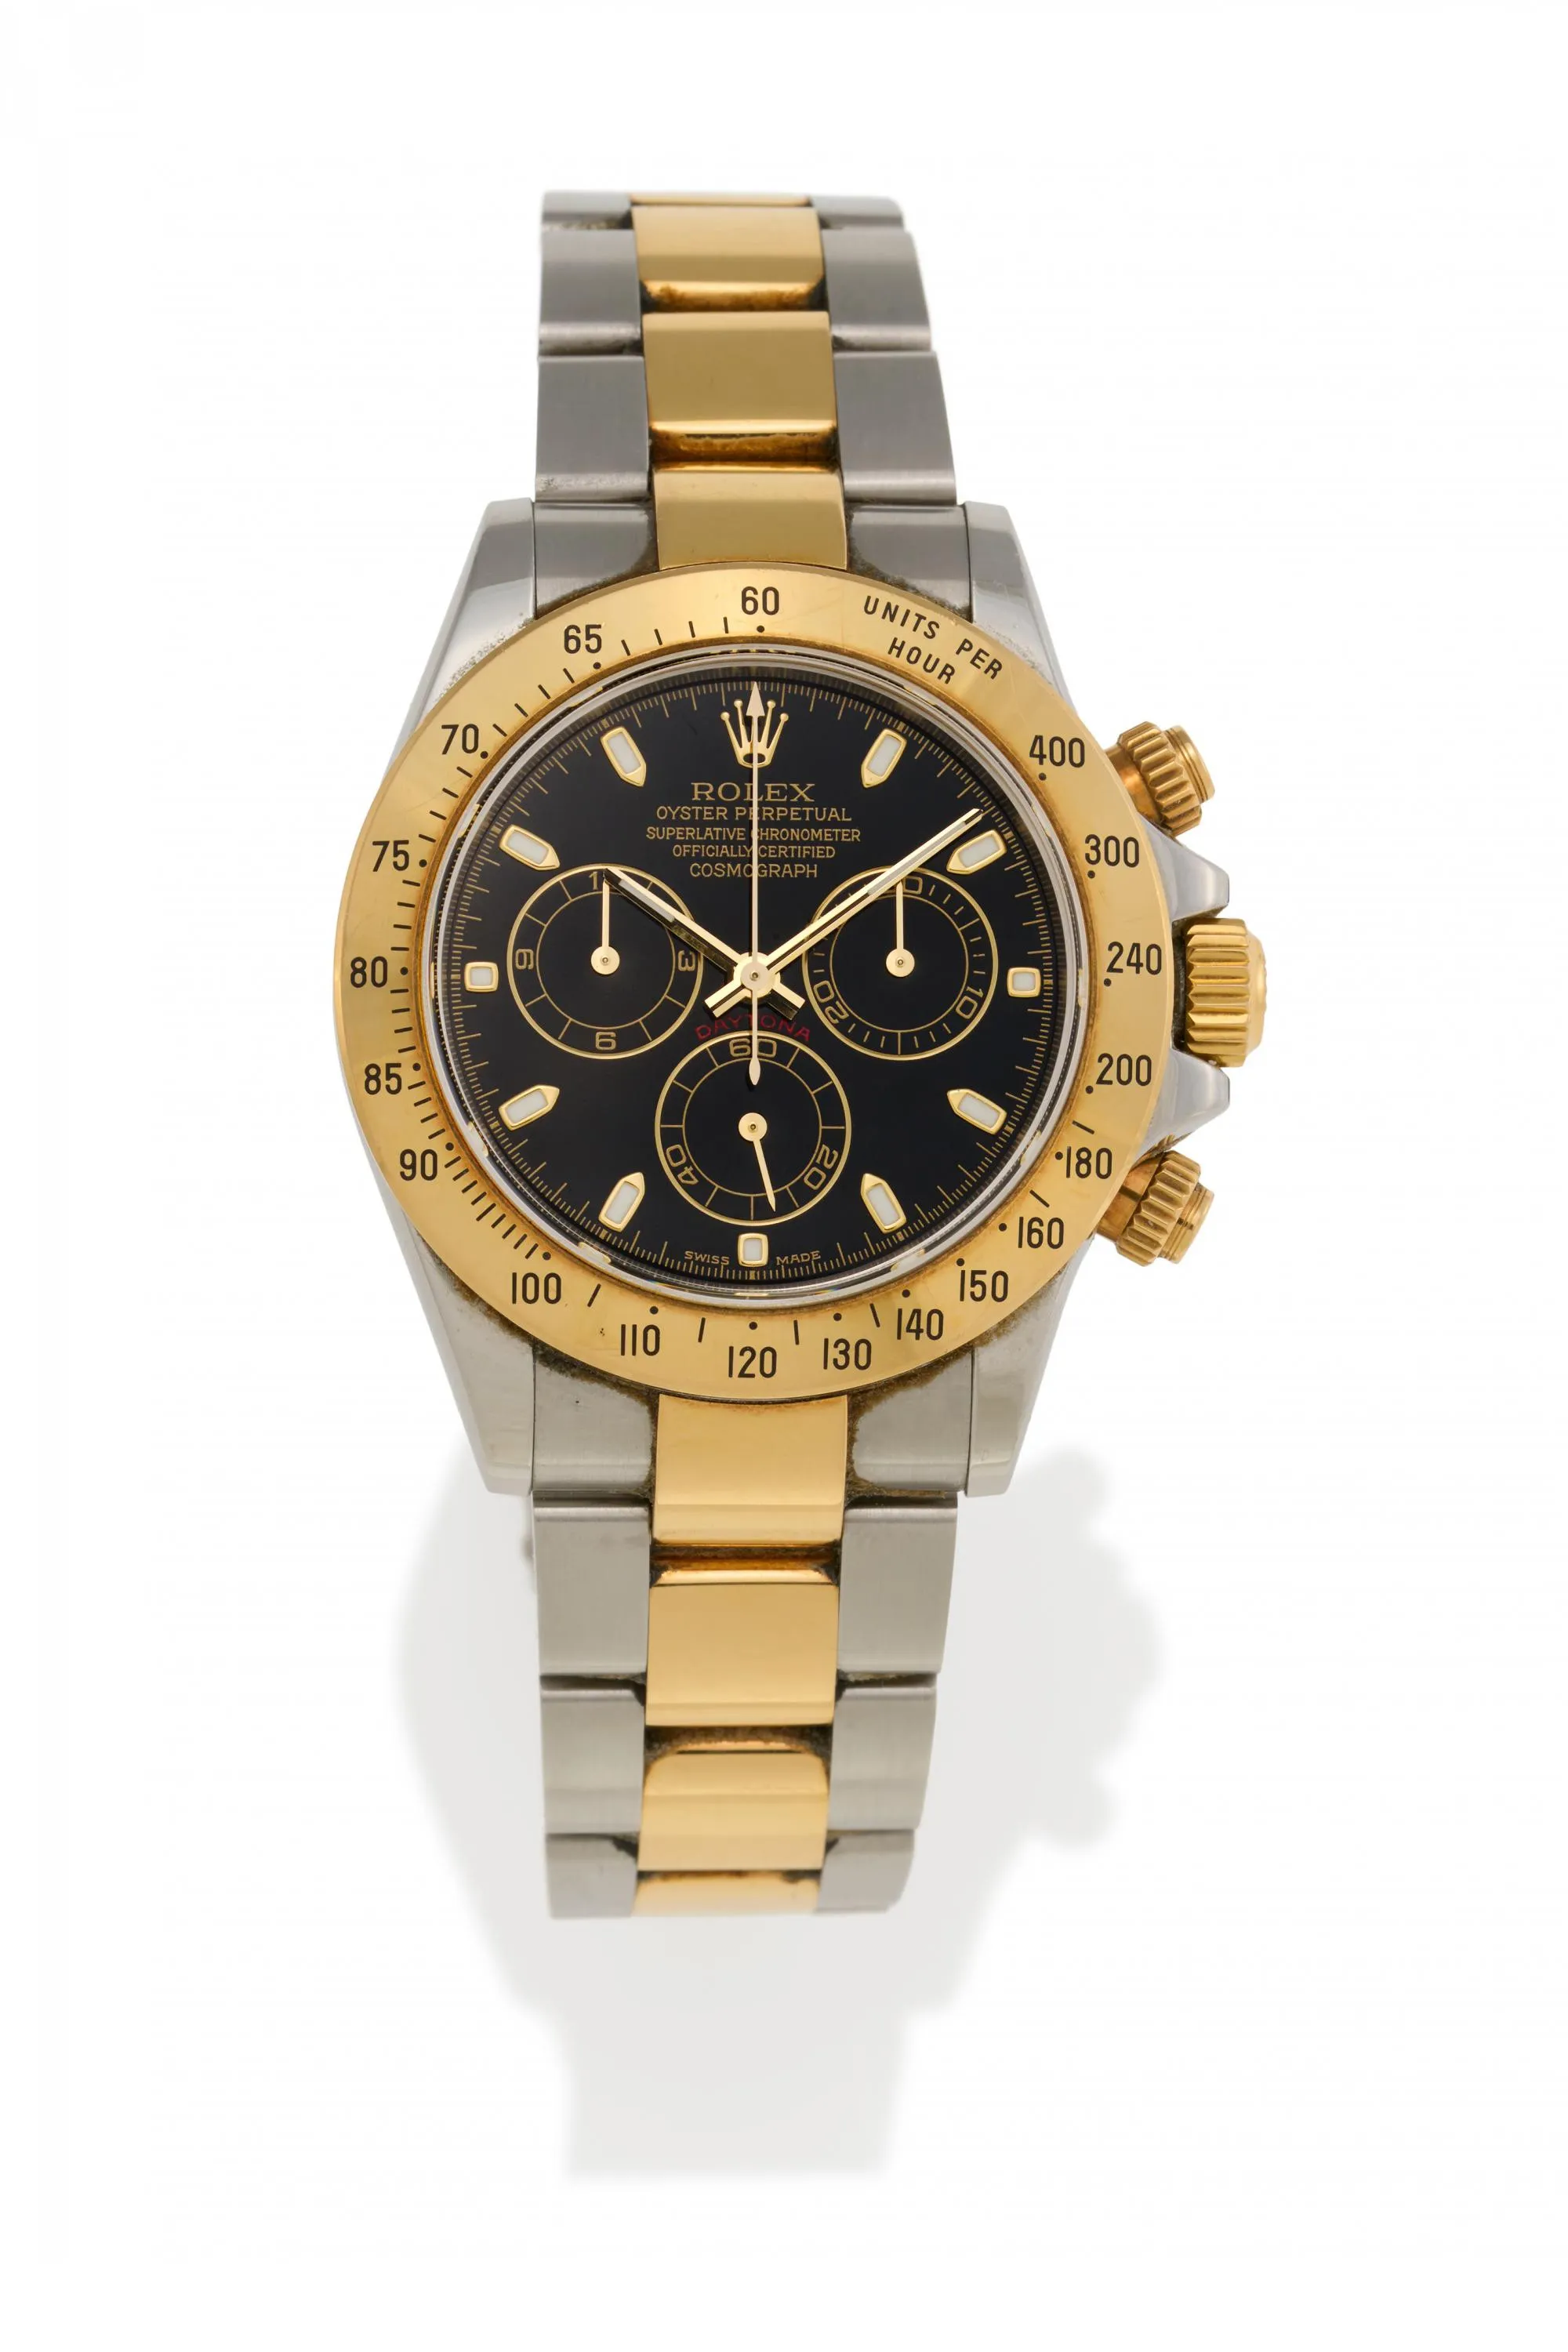 Rolex Daytona 116523 43mm Yellow gold and stainless steel Black